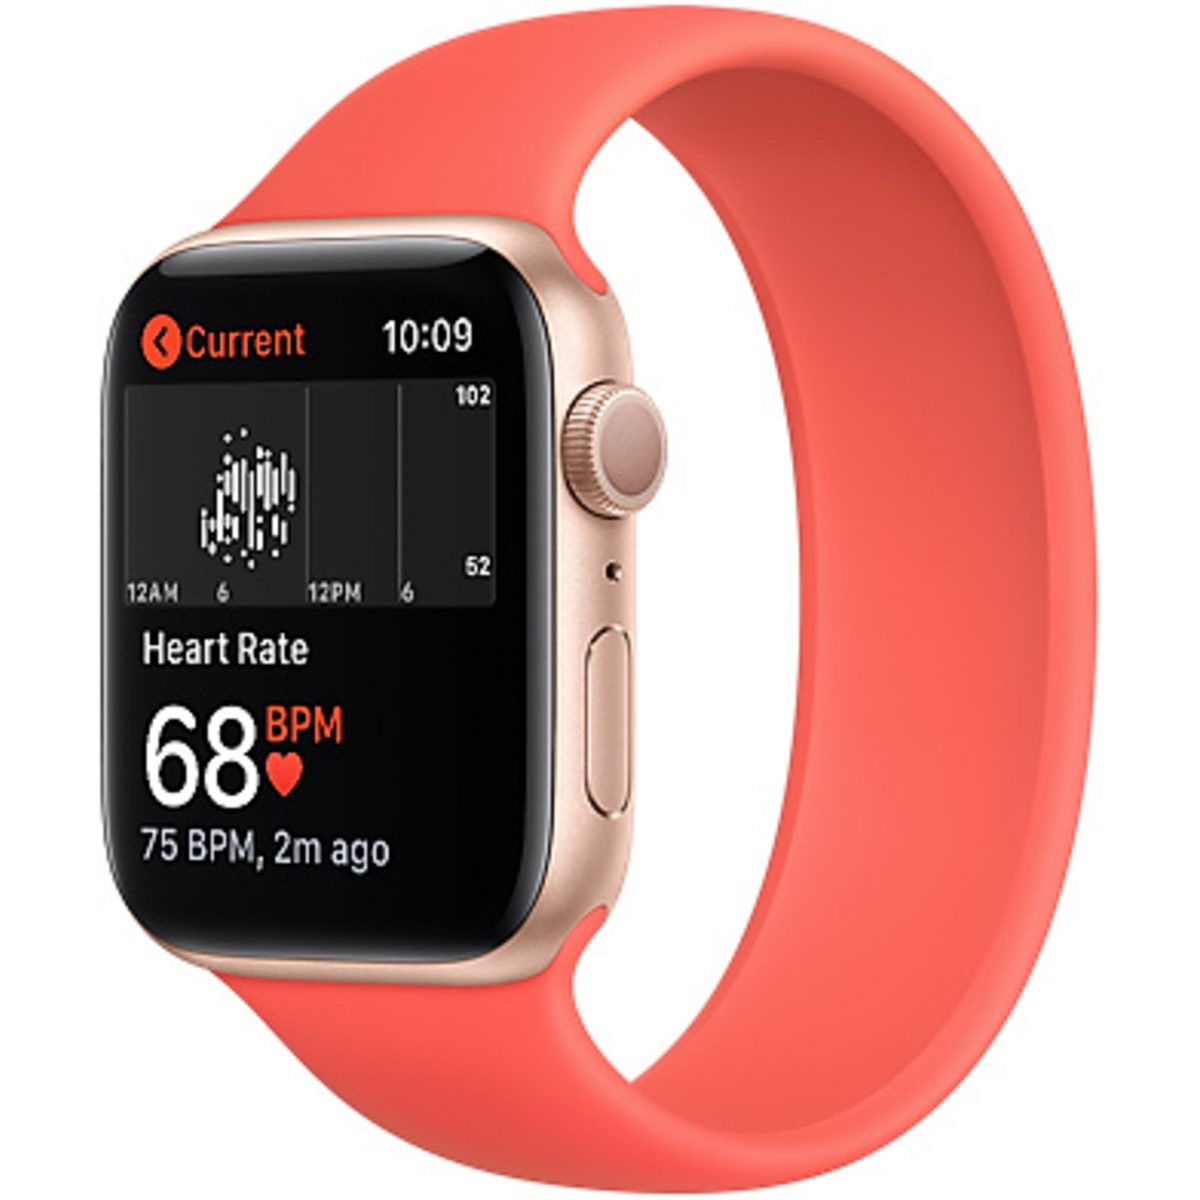 Apple Watch for health monitoring.